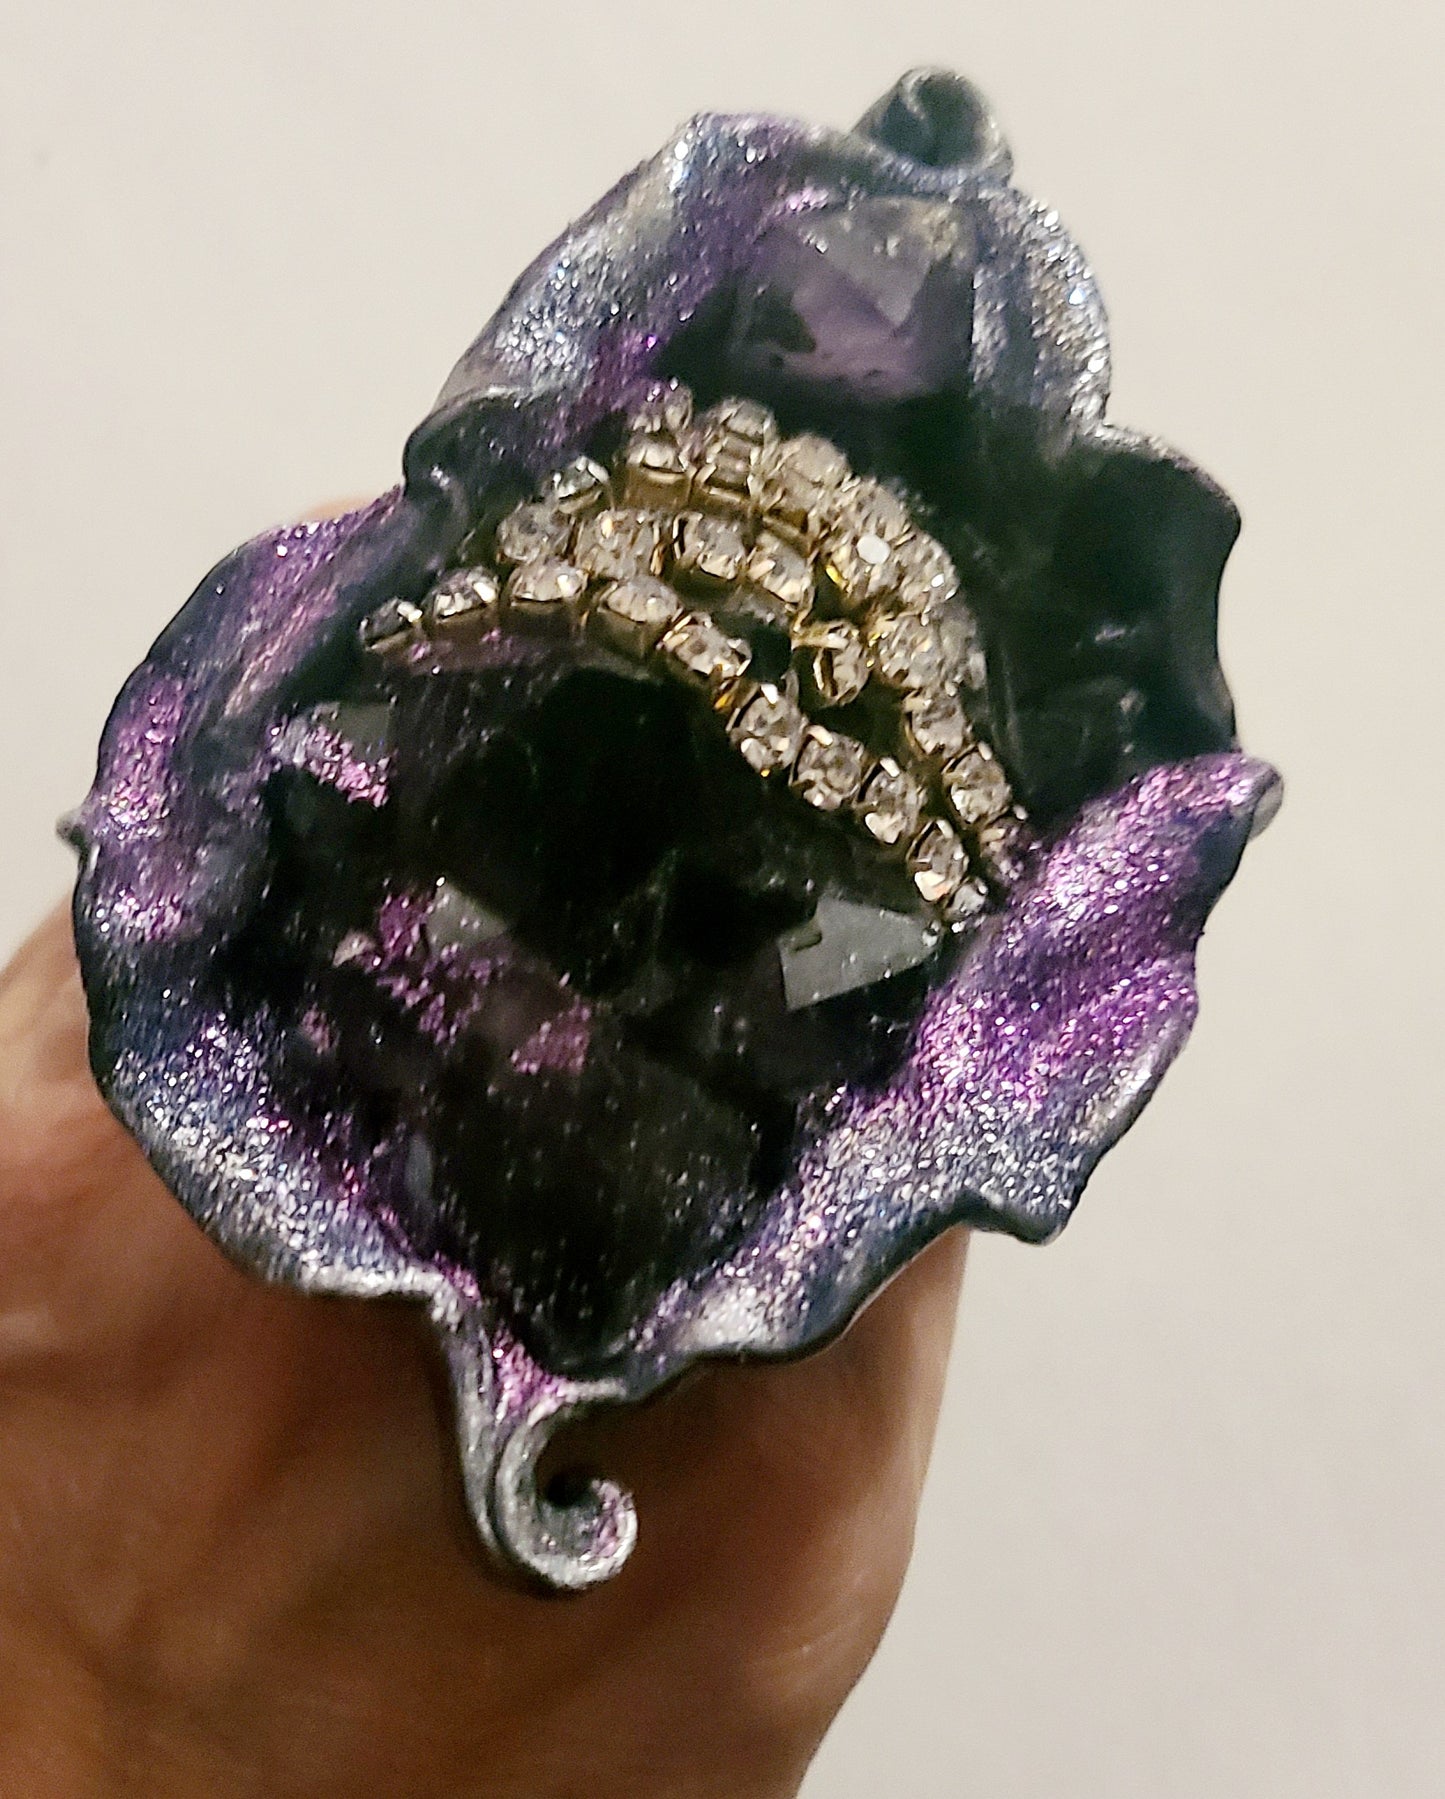 Gemmy Sculpted Amethyst & Rhinestone Adjustable Statement Ring, Oversized Purple Lavender and Silver Yoni Ring, Runway Ready Jewelry